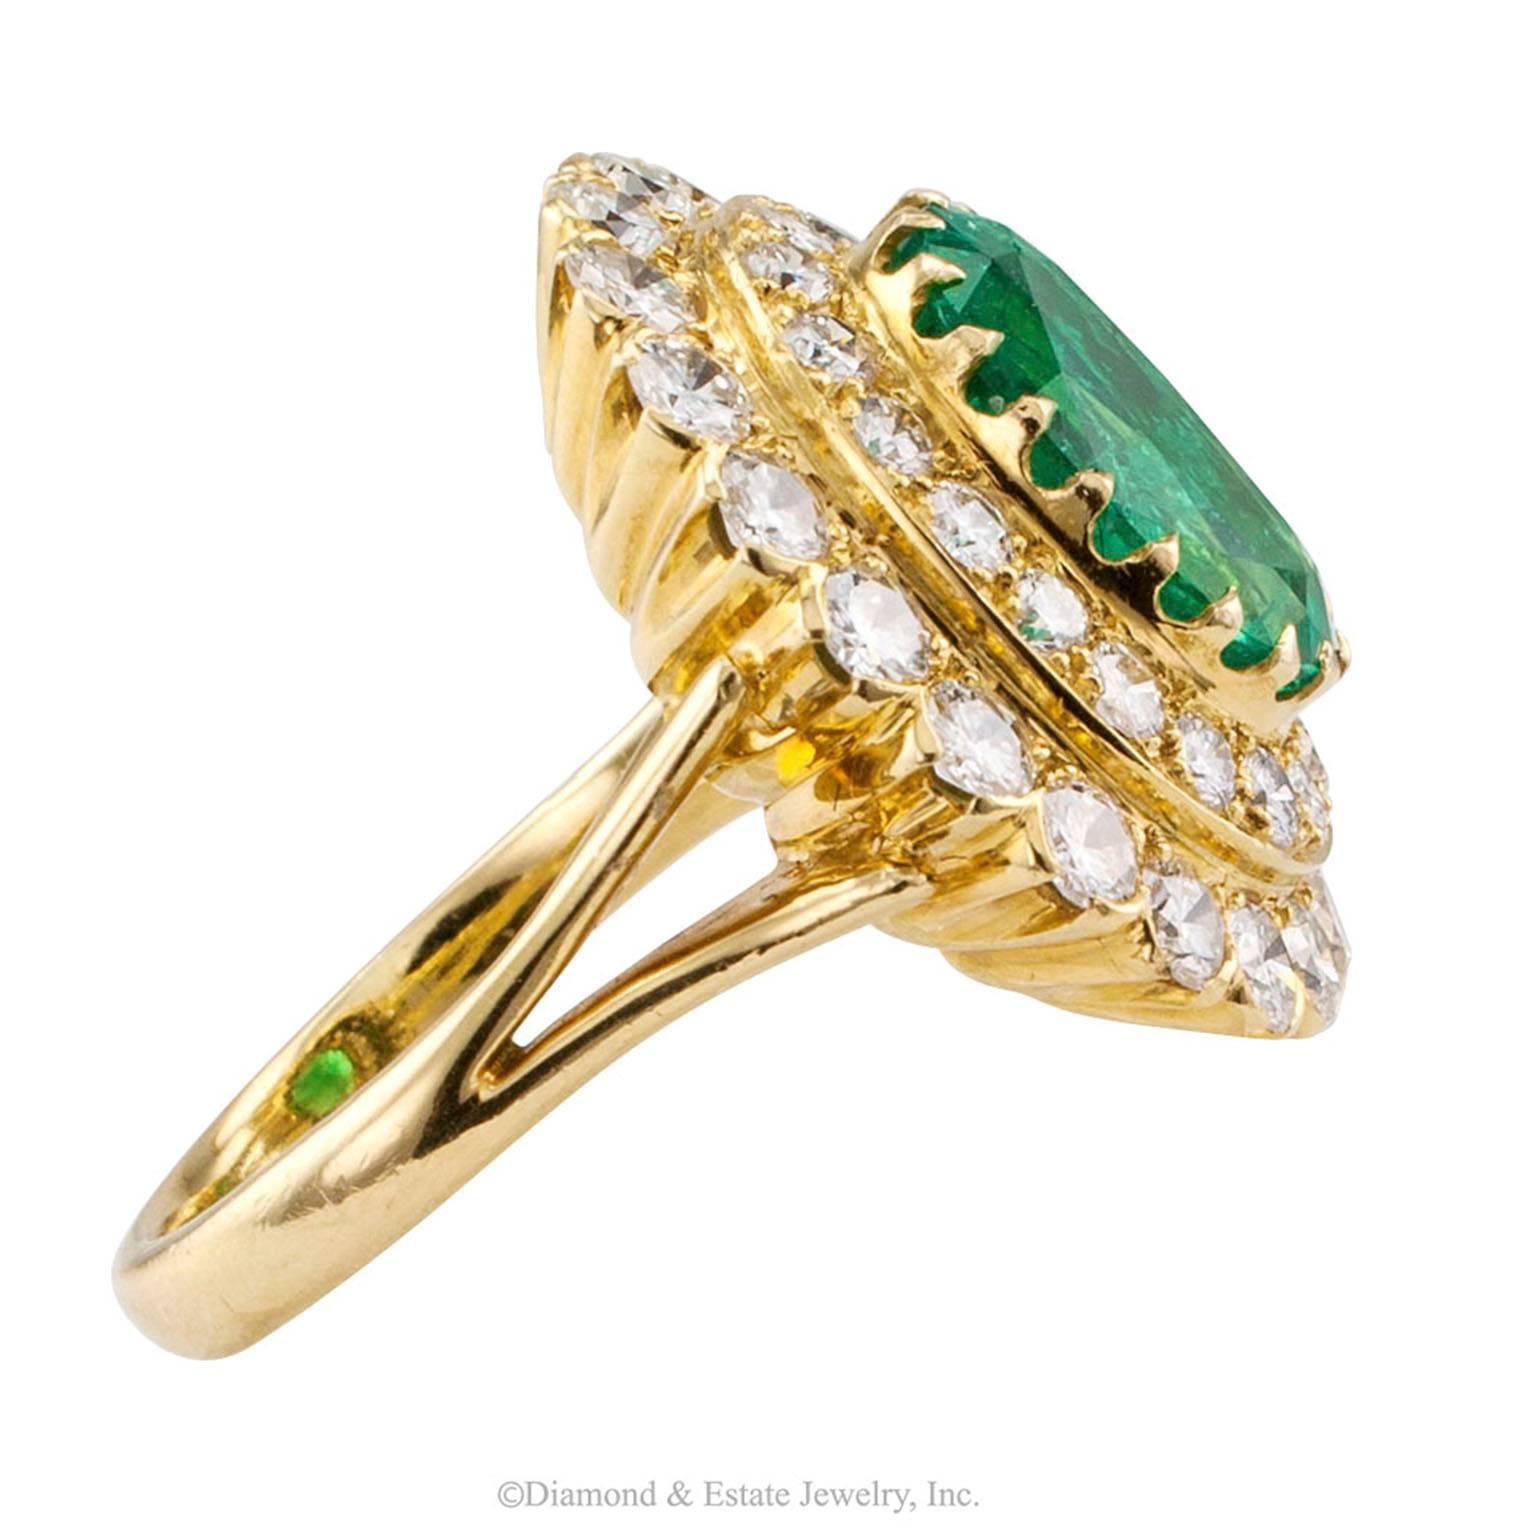 Oval Colombian Emerald Diamond Gold Ring

This oval ring is set with an oval Colombian Emerald weighing approximately 3.50 carats bordered by two rows of round brilliant-cut diamonds totaling approximately 2.00 carats mounted in 18-karat yellow gold